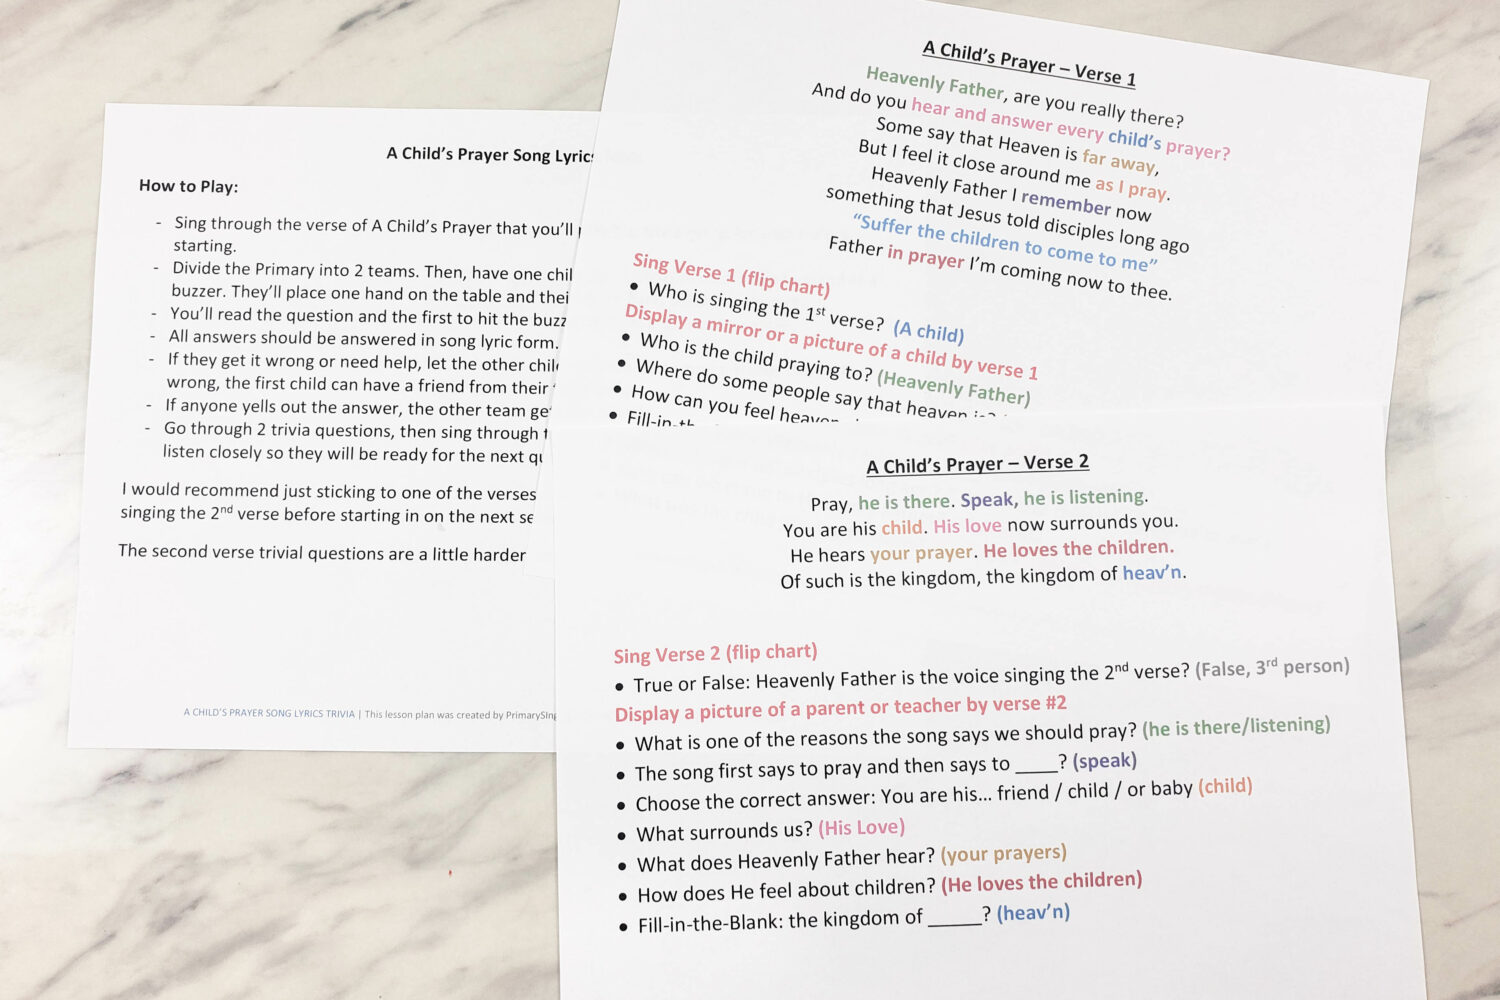 A Child's Prayer song lyrics trivia a fun printable trivia game to help the kids learn and reinforce the words of this song with singing time song helps for LDS Primary Music Leaders. 